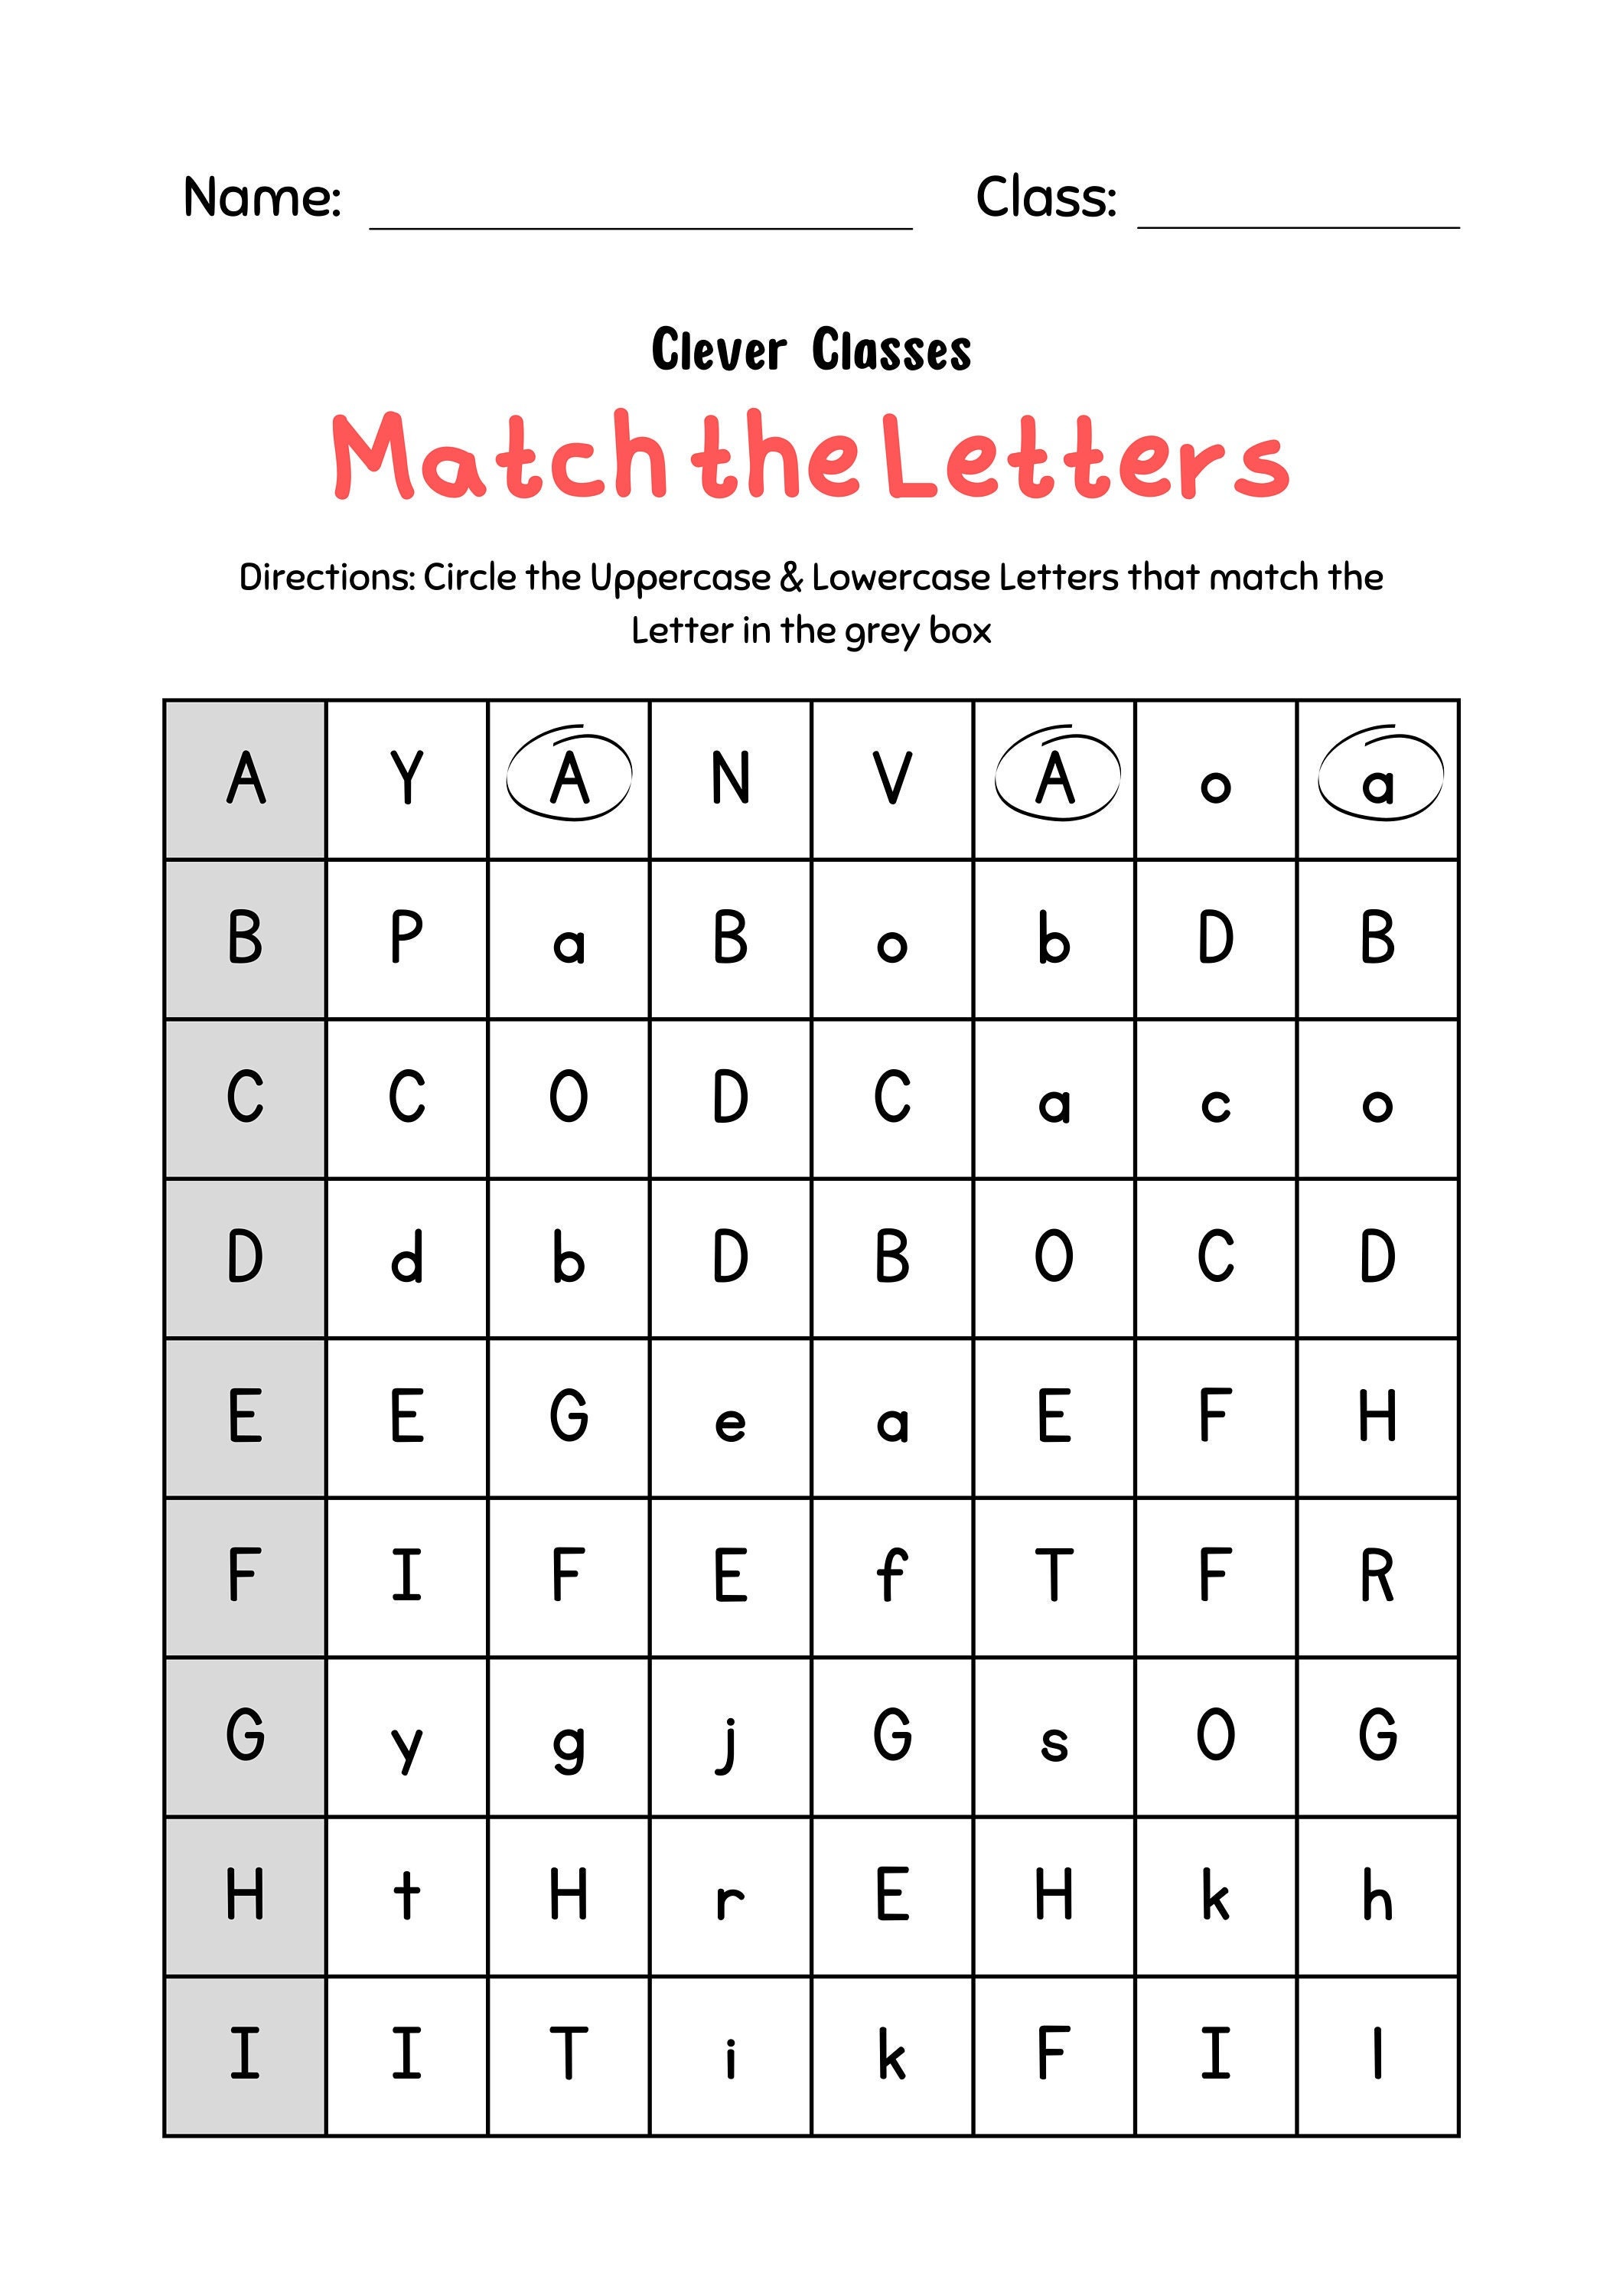 29 Match the Letters Printable Worksheets - Etsy